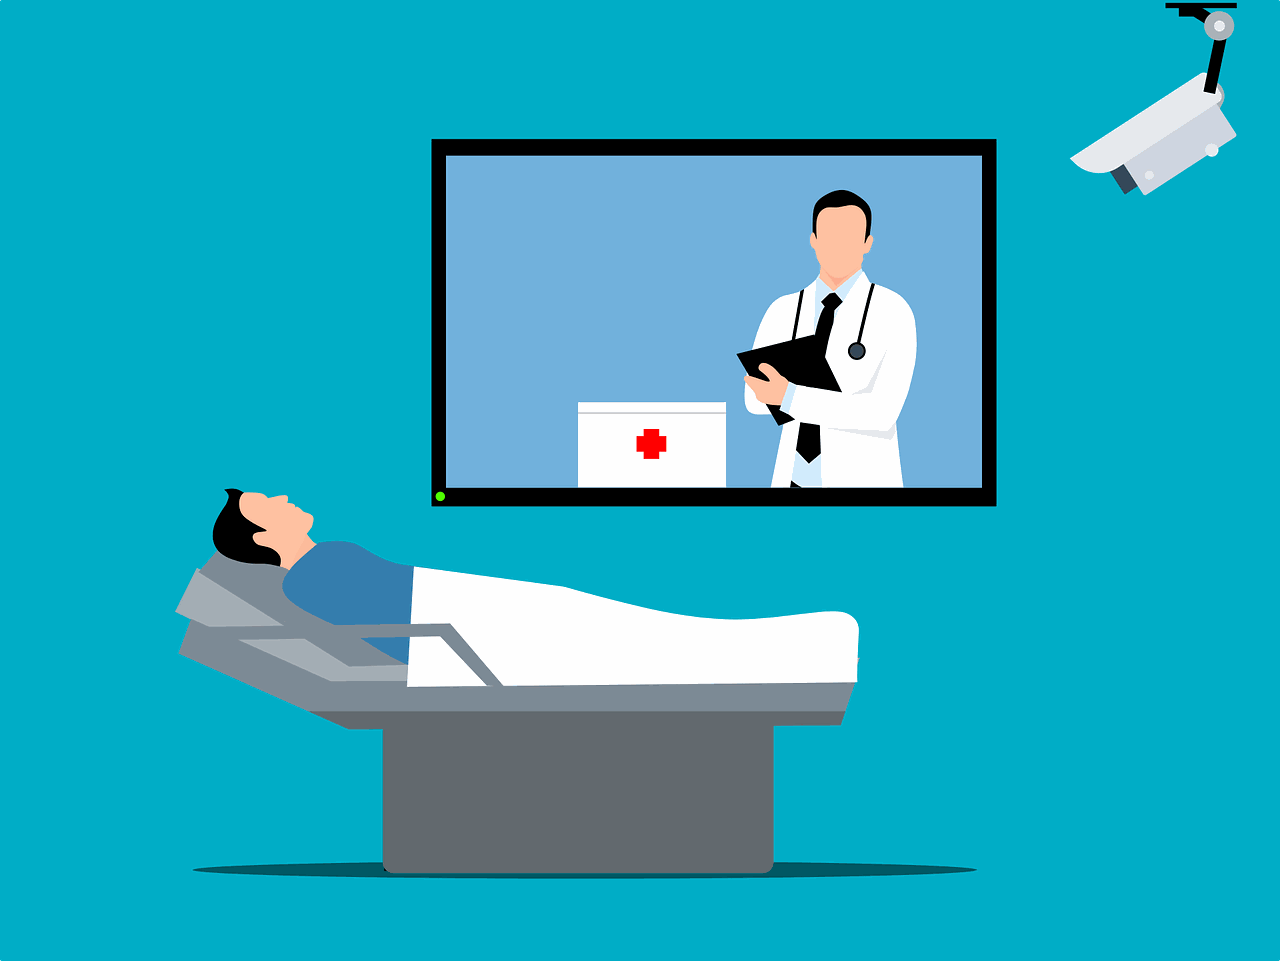 An illustration of a doctor on a screen looking at a patient on a stretcher.